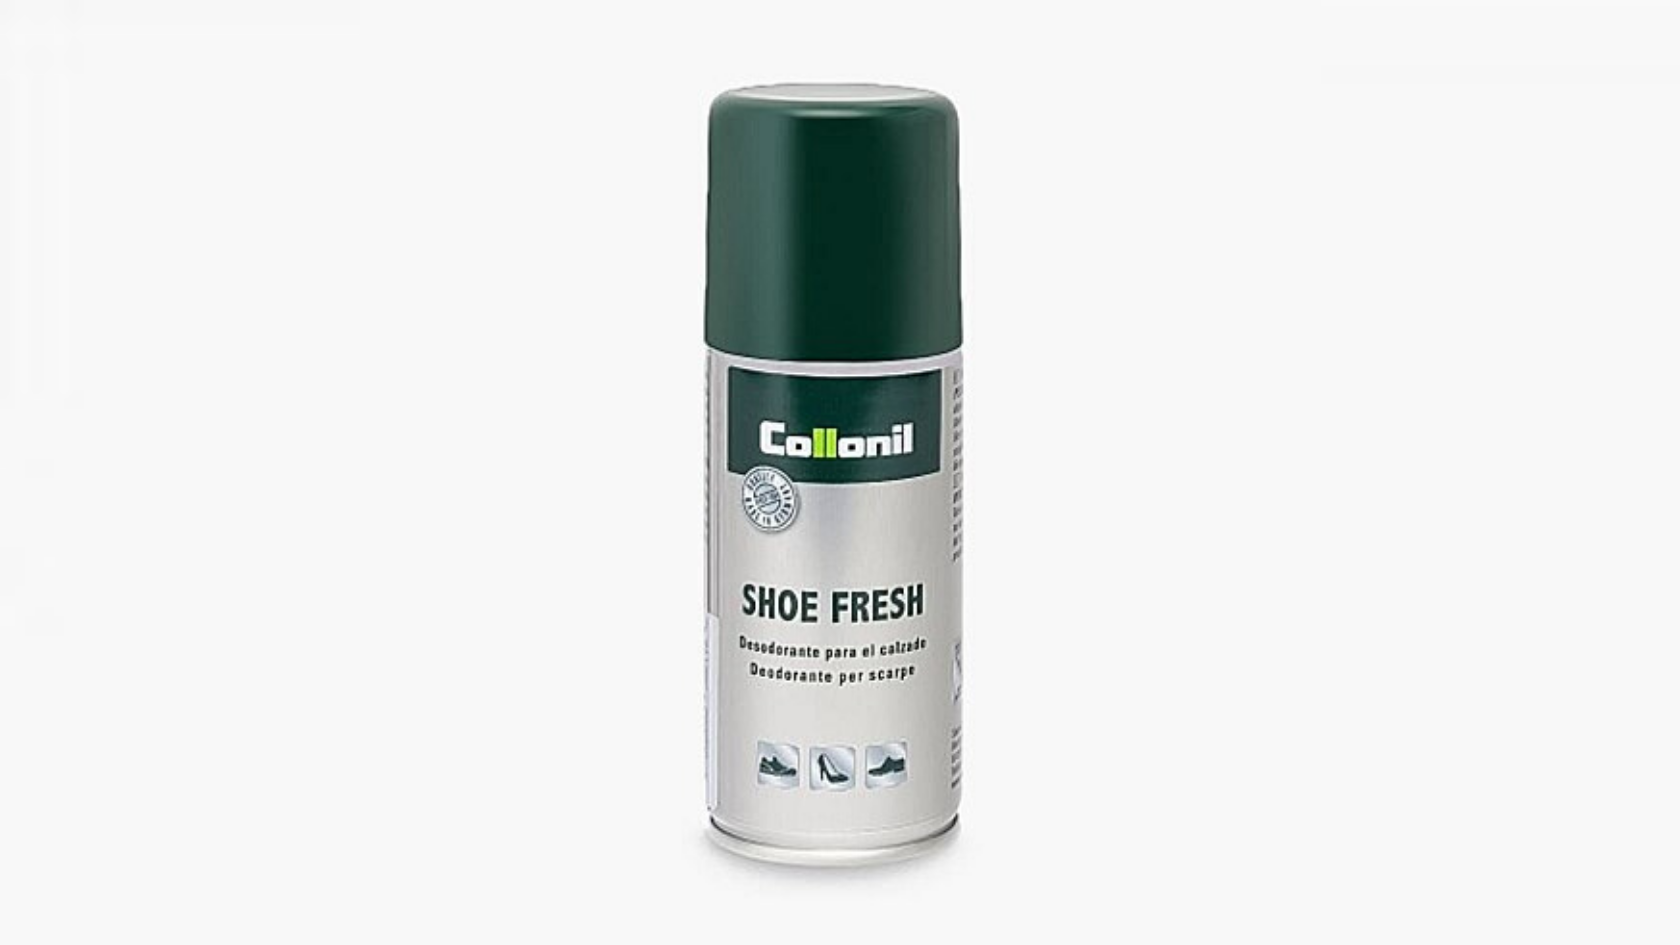 Collonil shoe fresh deodorizer suspended upon a neutral background